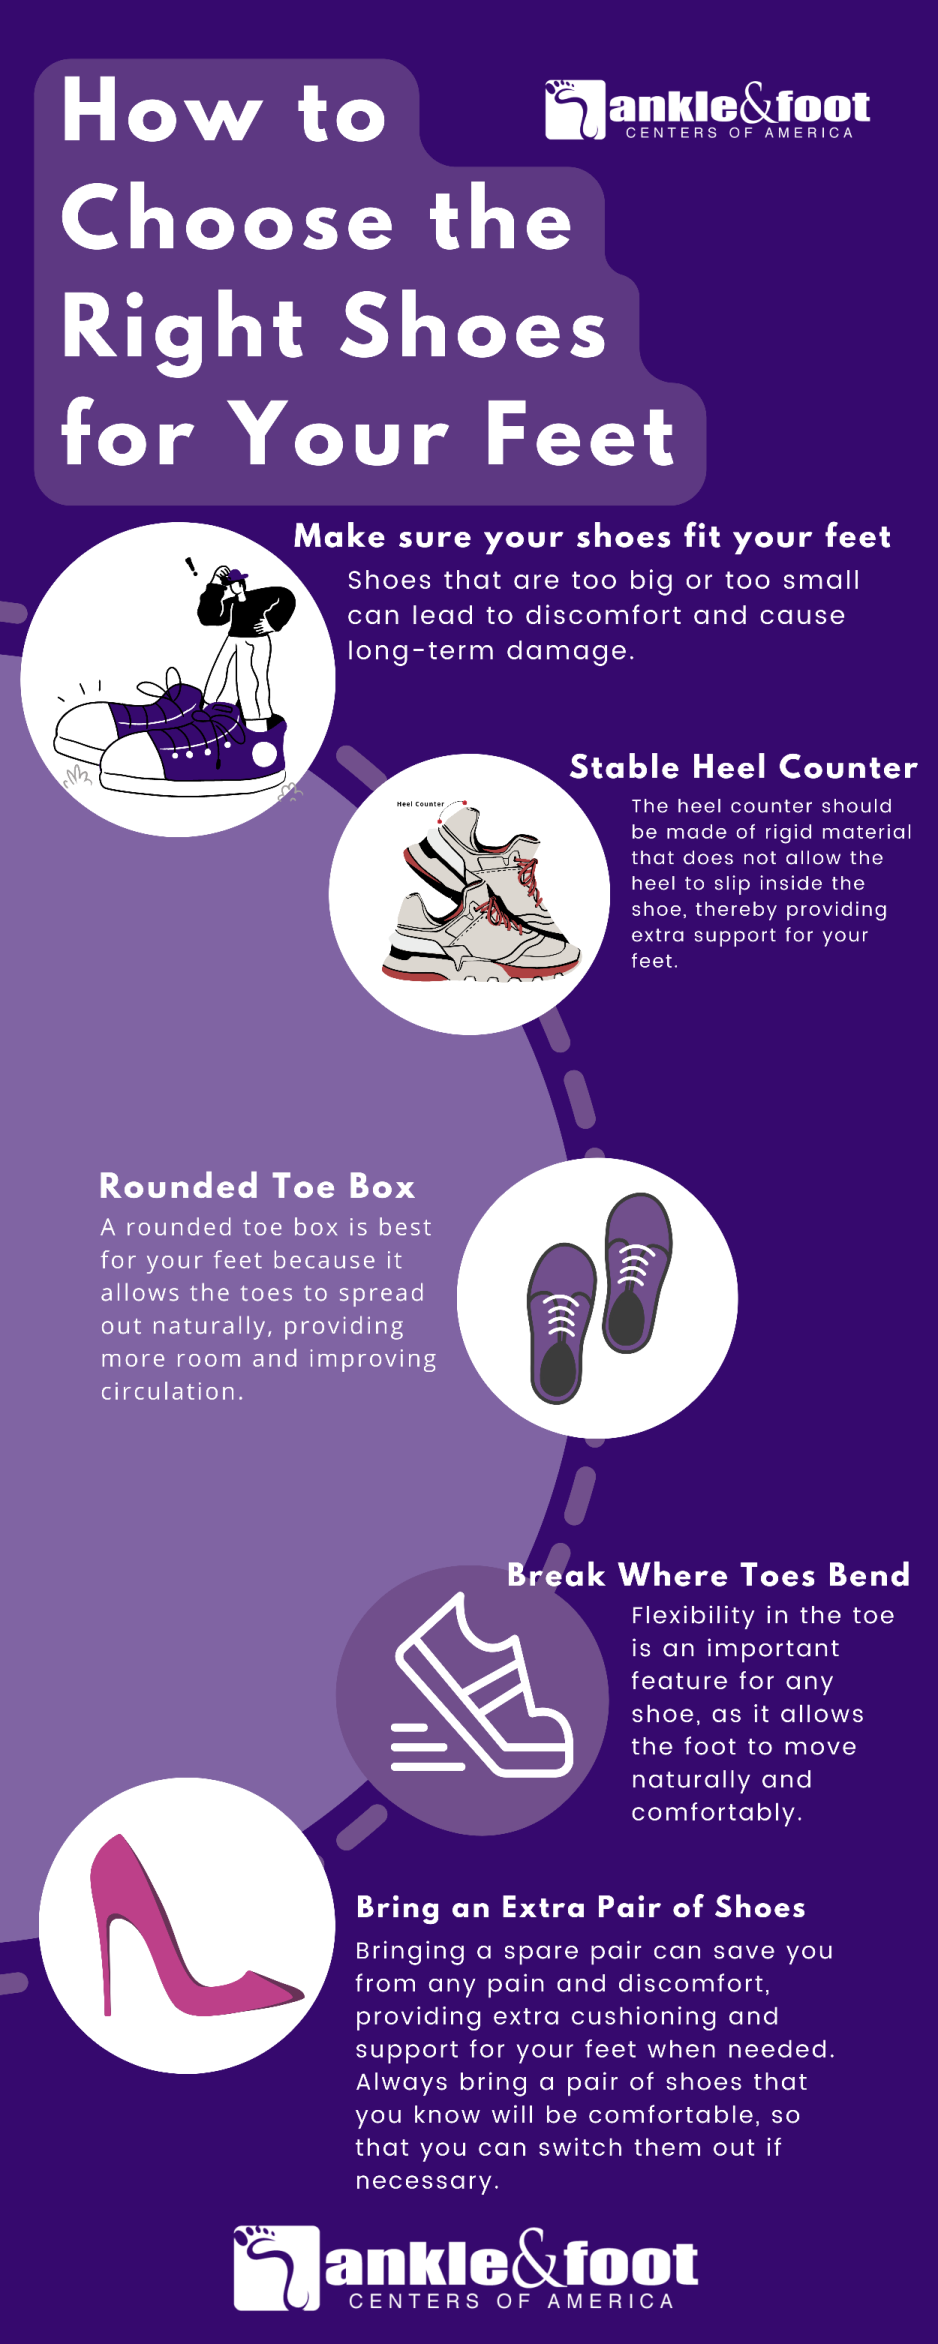 How to Choose the Right Shoes for Your Feet